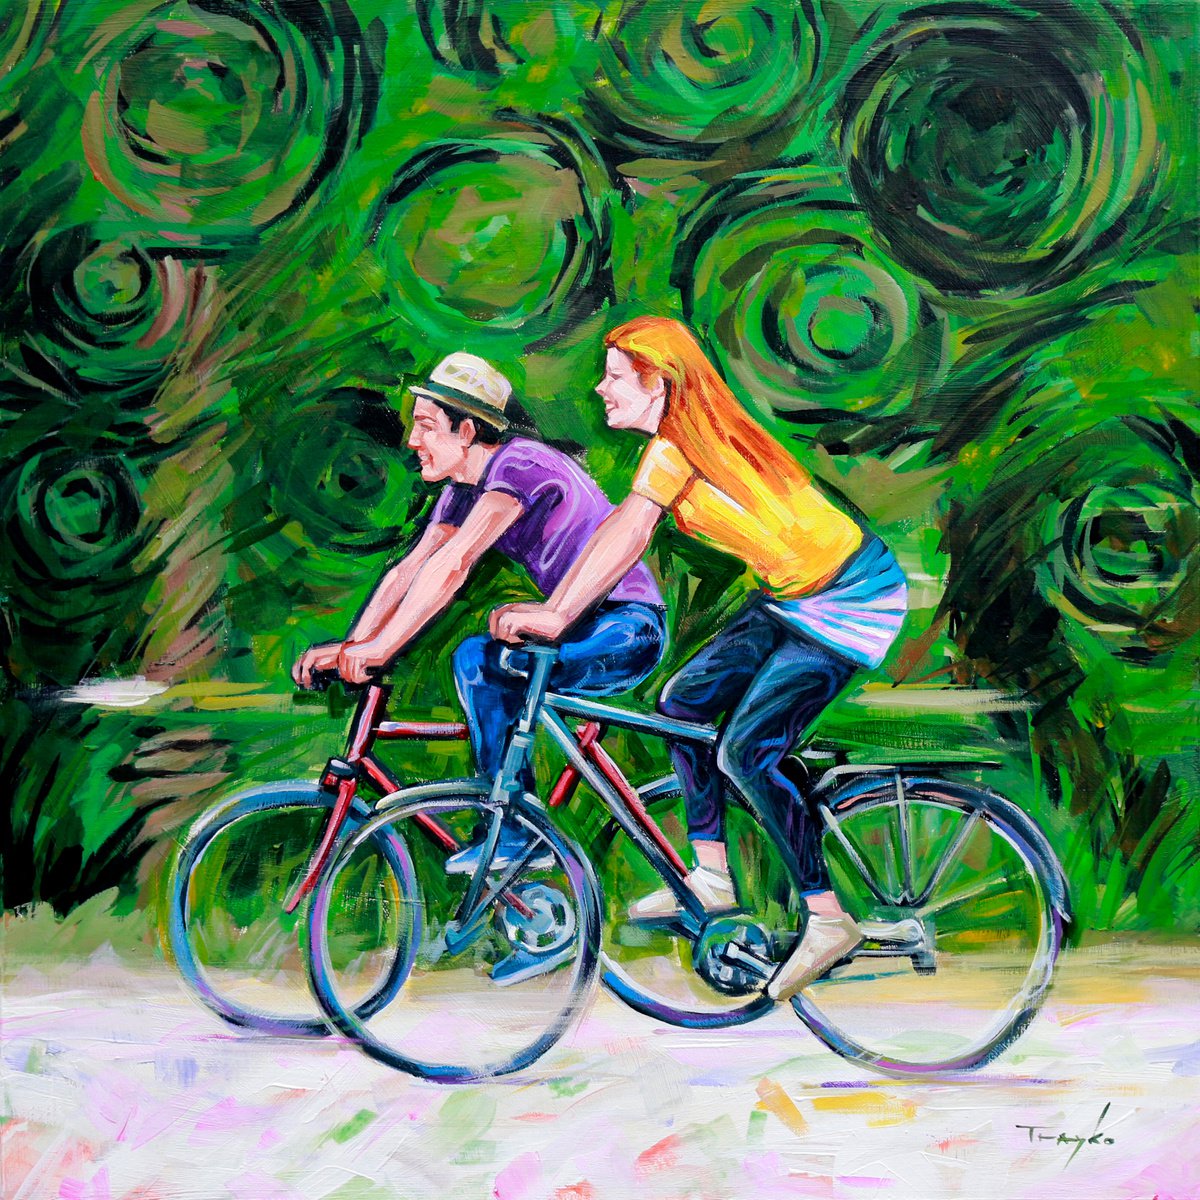 I Can’t Stop Smiling. Riding. Bicycle. Park by Trayko Popov